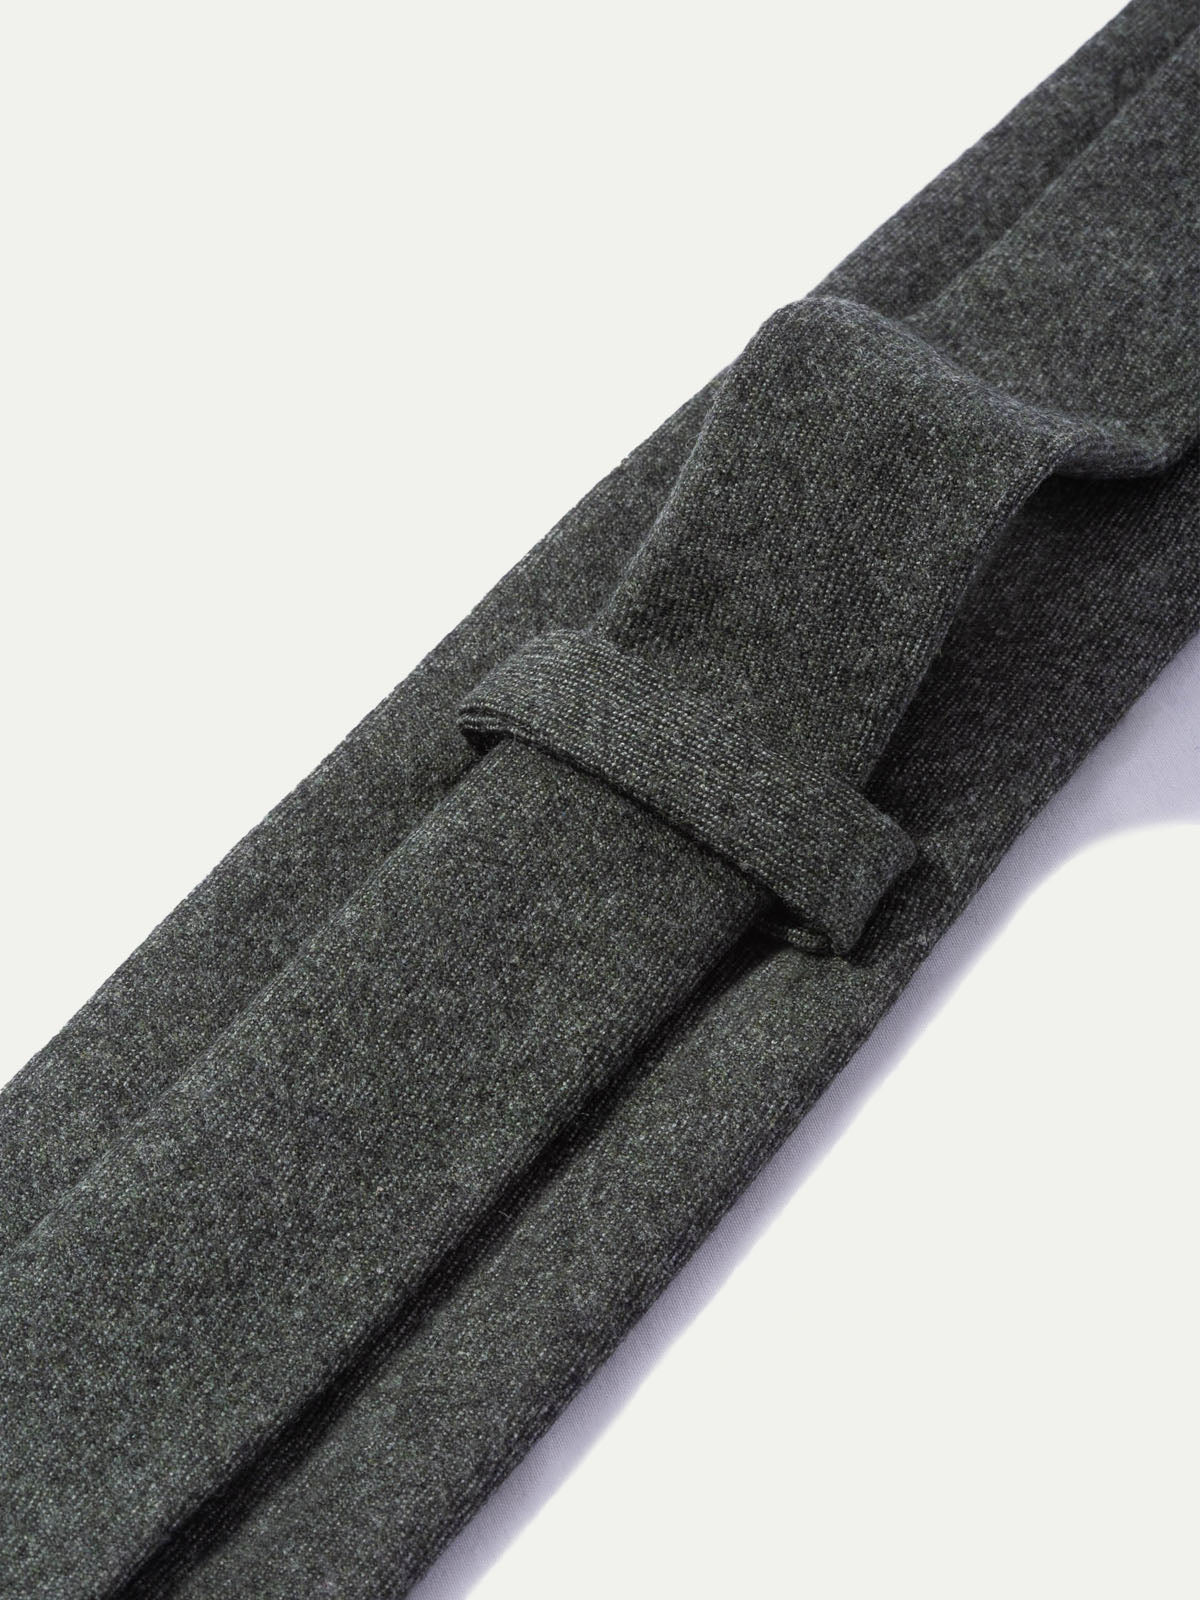 Dark green flannel tie - Hand Made In Italy